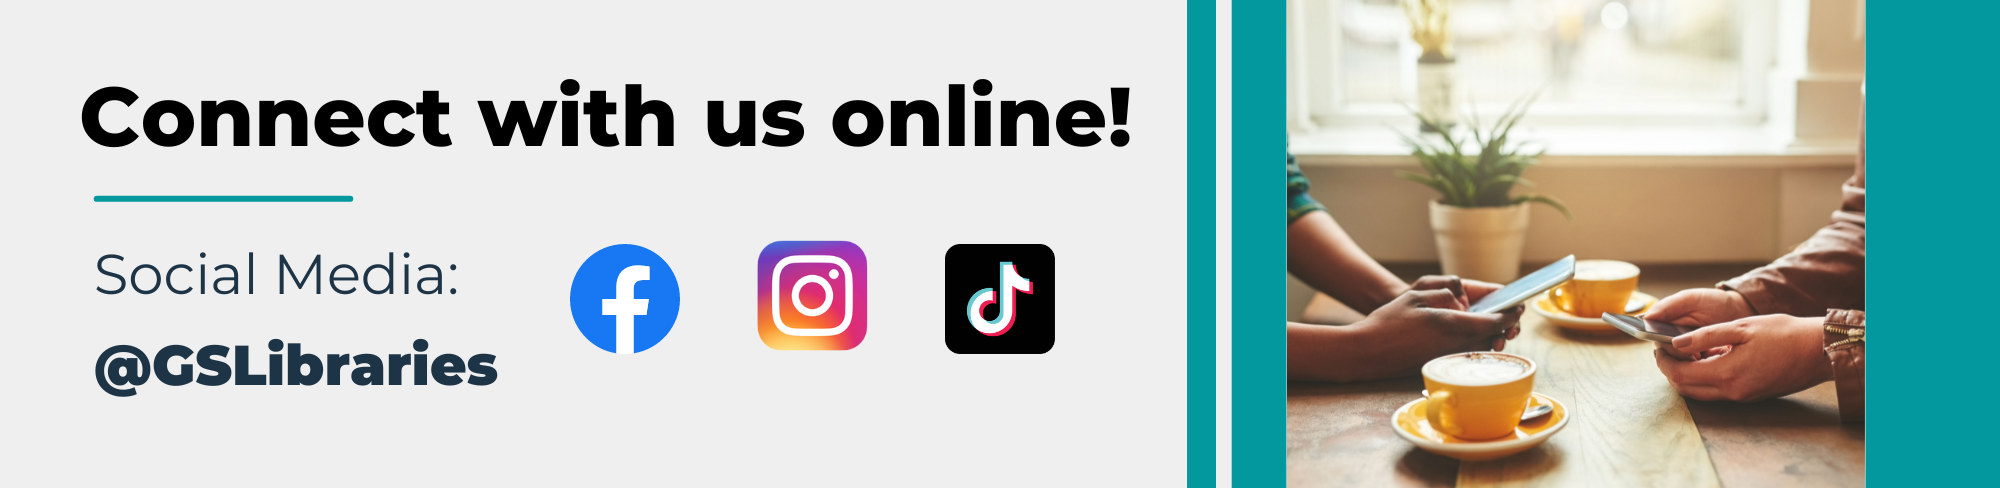 Connect online with our social media - @GSLibraries.